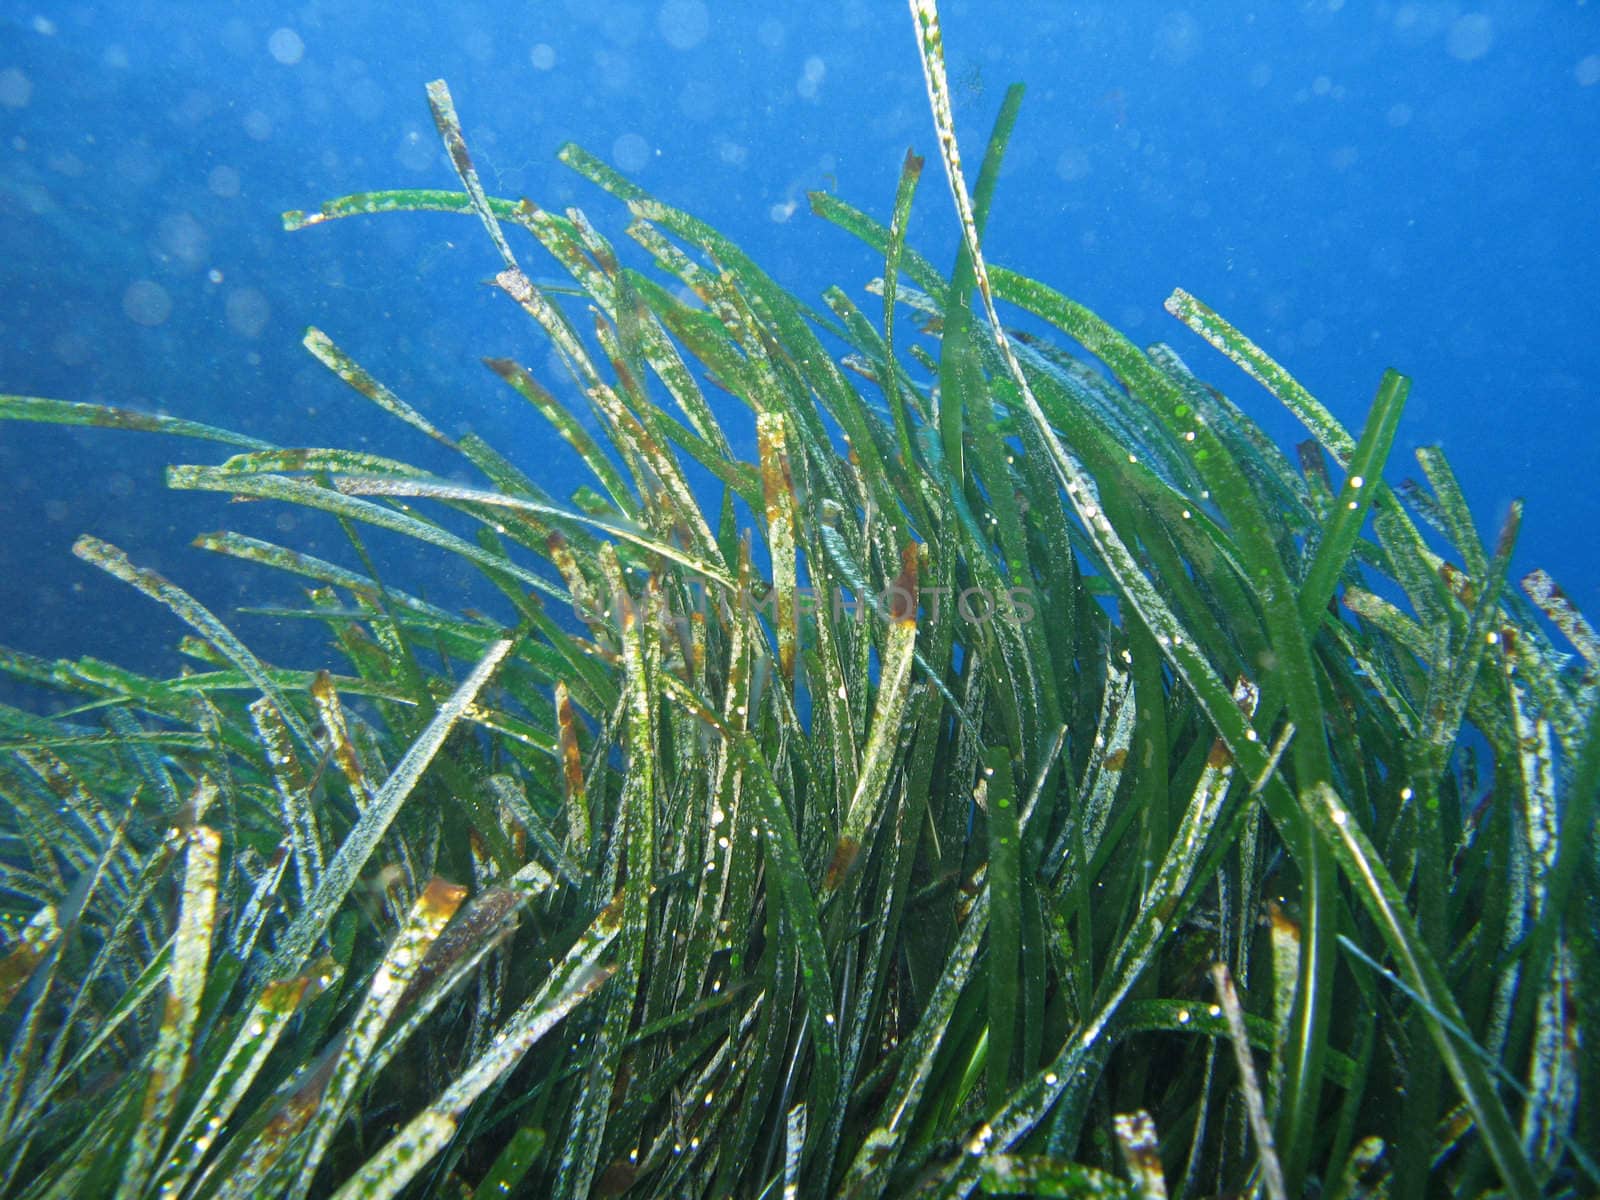 “Neptune Grass” known also as Posidonia Oceanica. Shot captured in the wild in Mediterranean Sea.